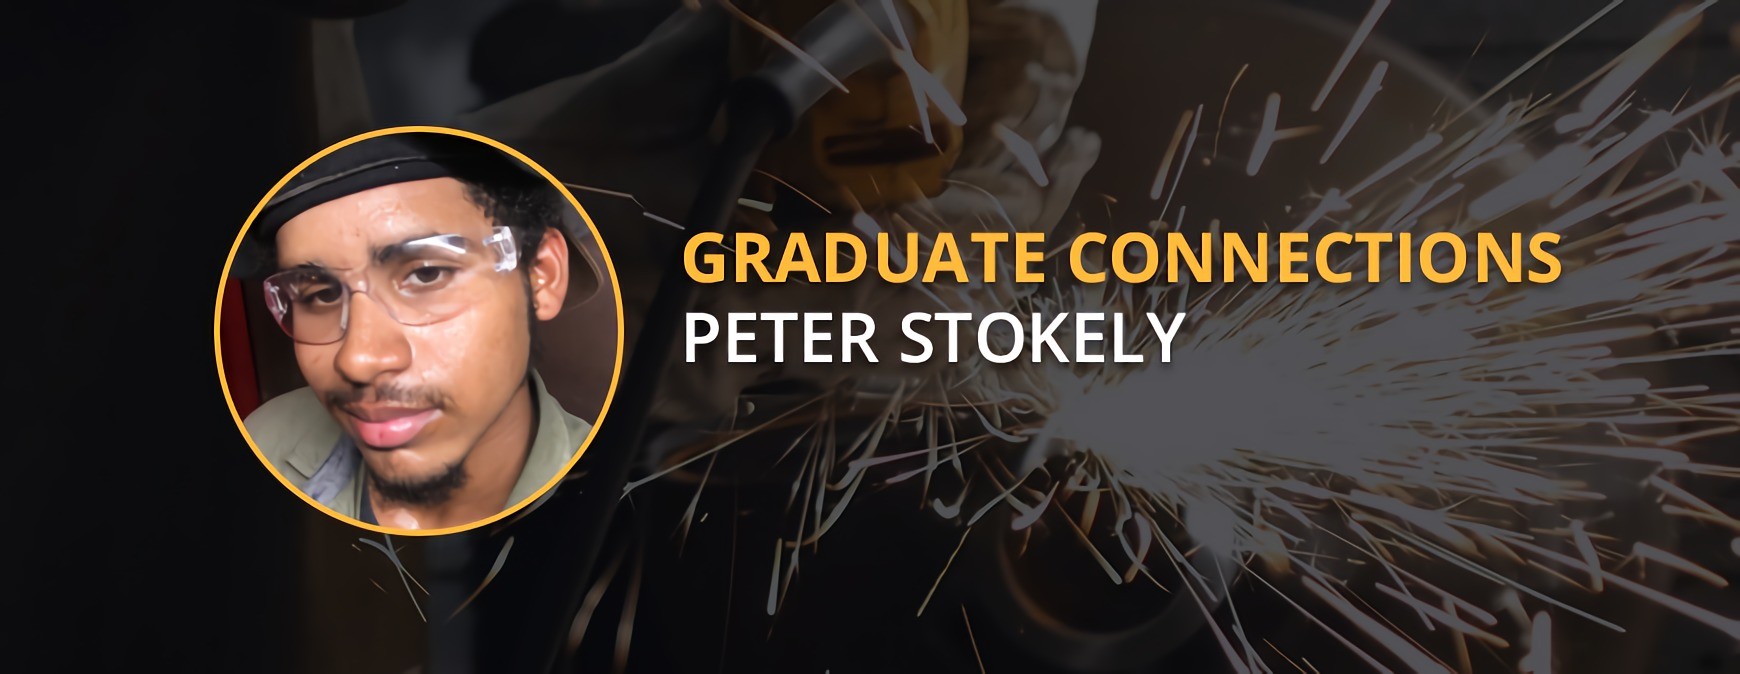 Peter Stokely